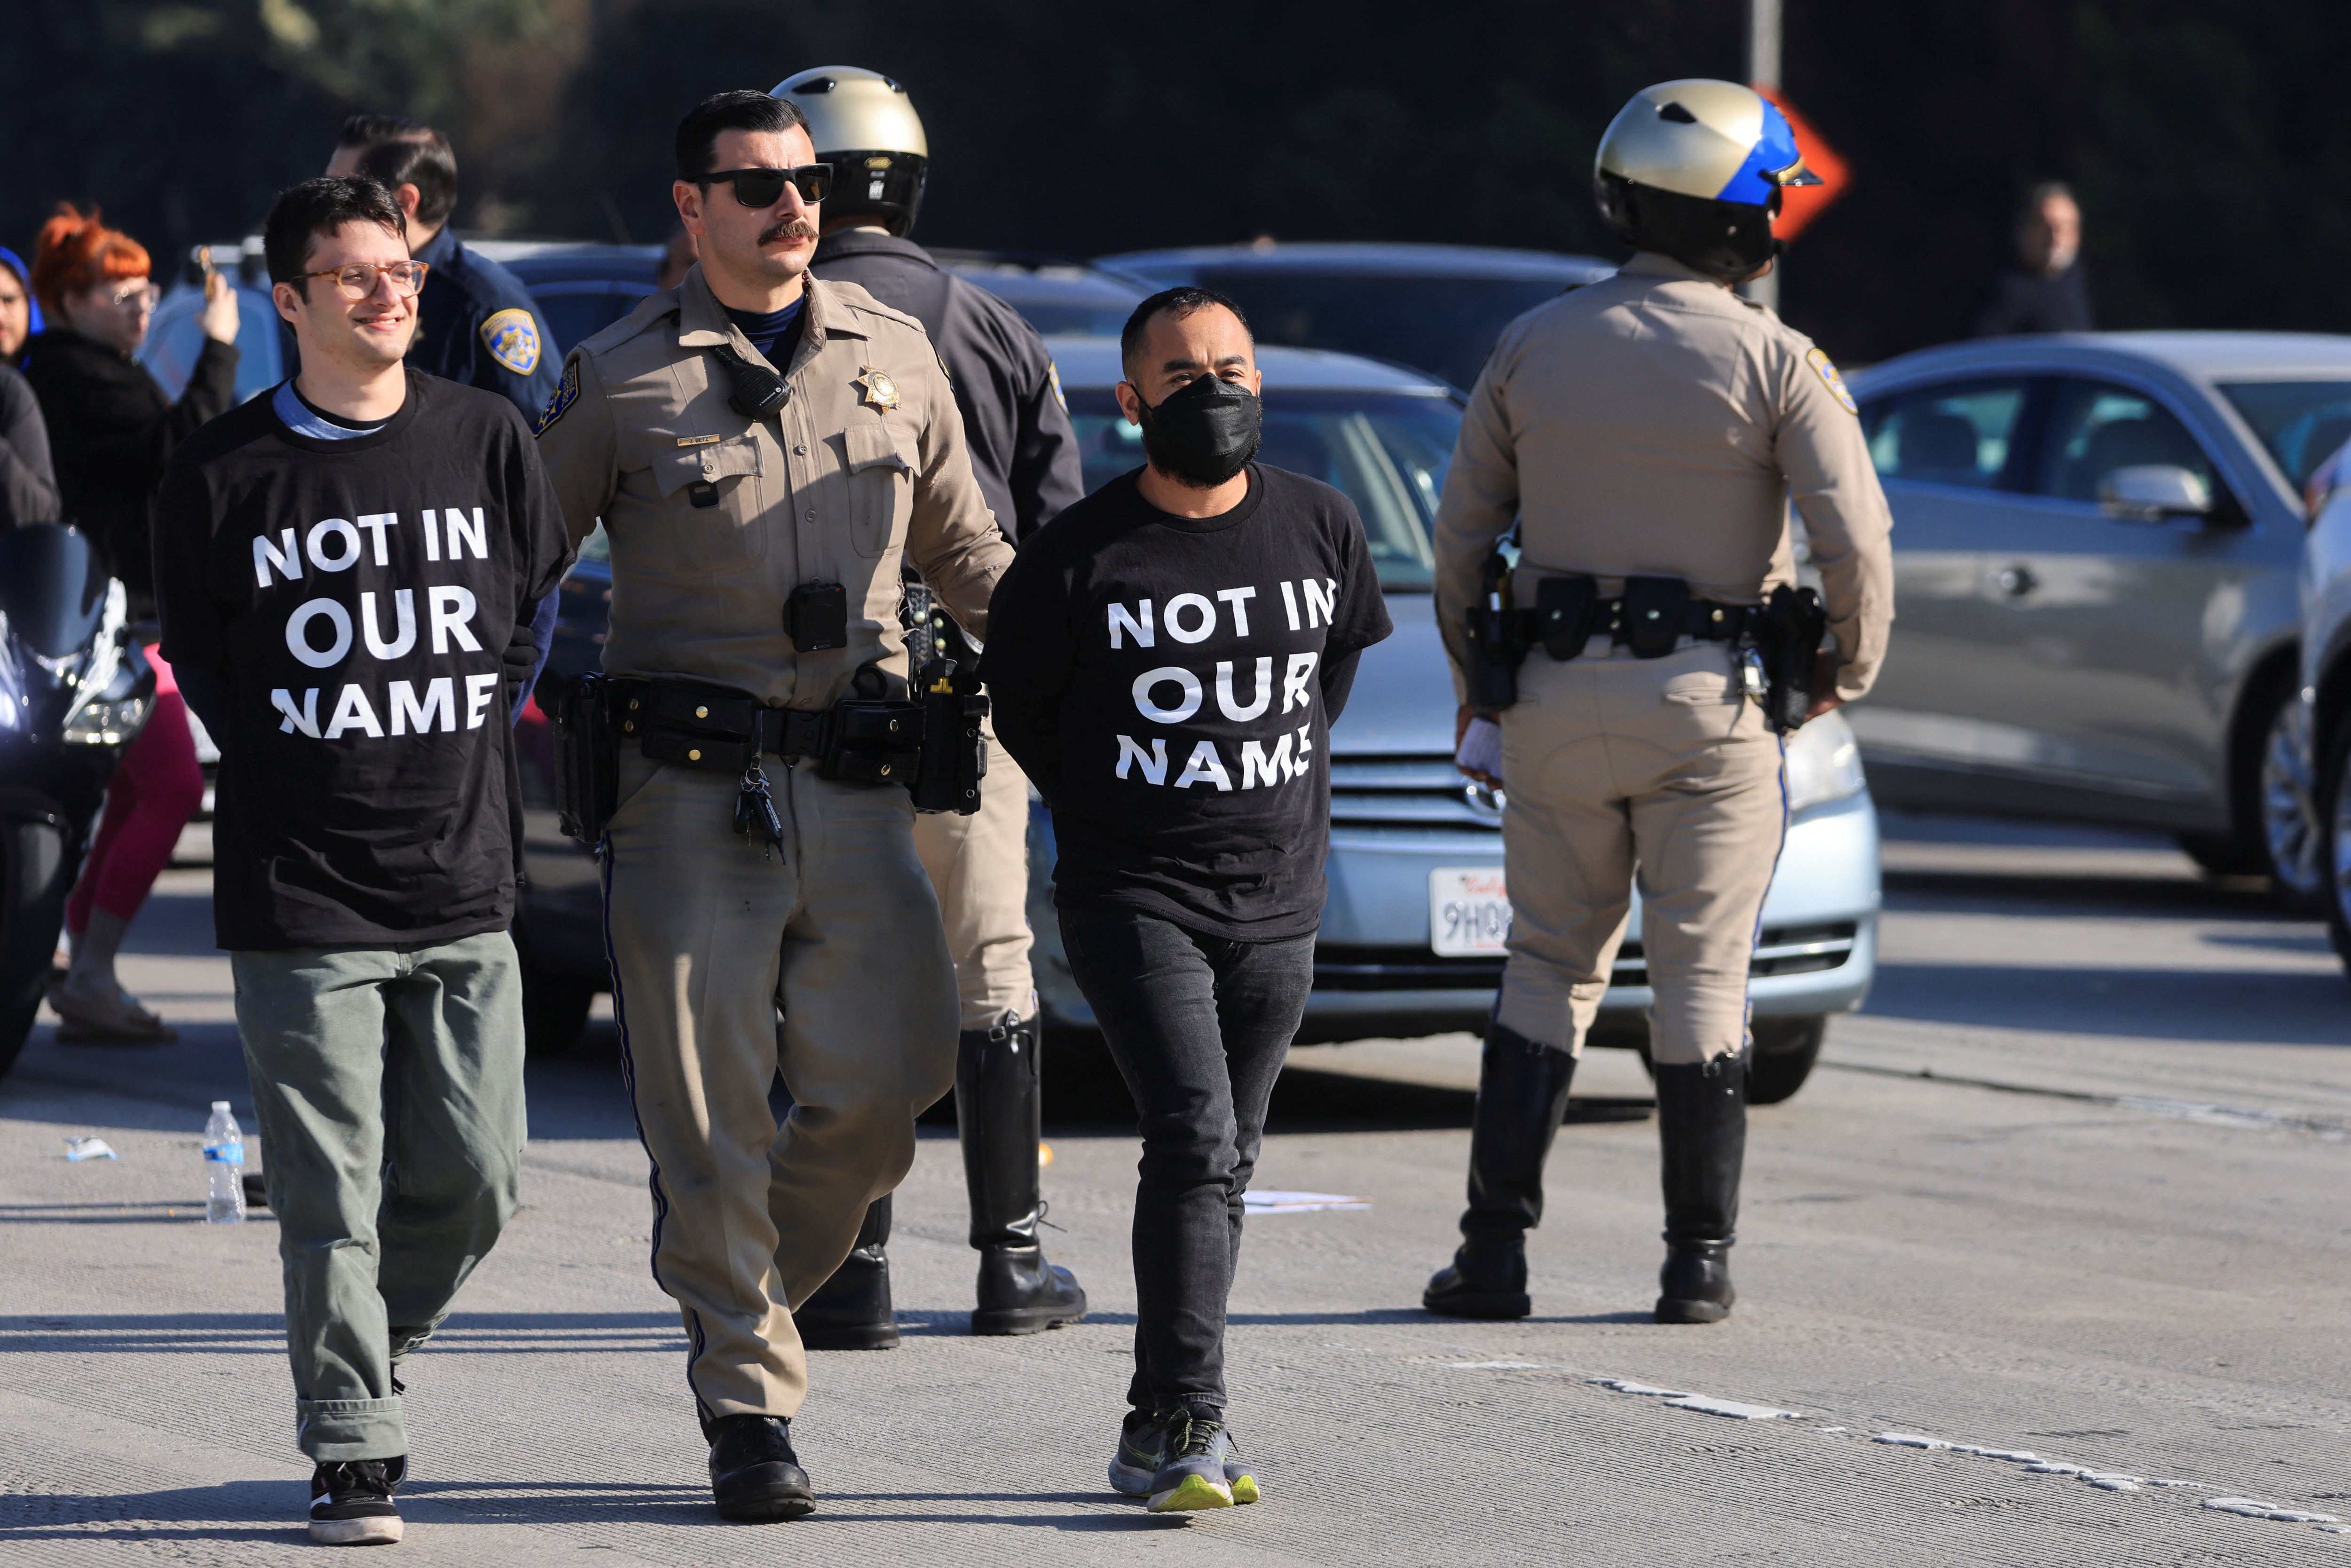 A law enforcement officer detains demonstrators during protest on 110 Freeway in Los Angeles